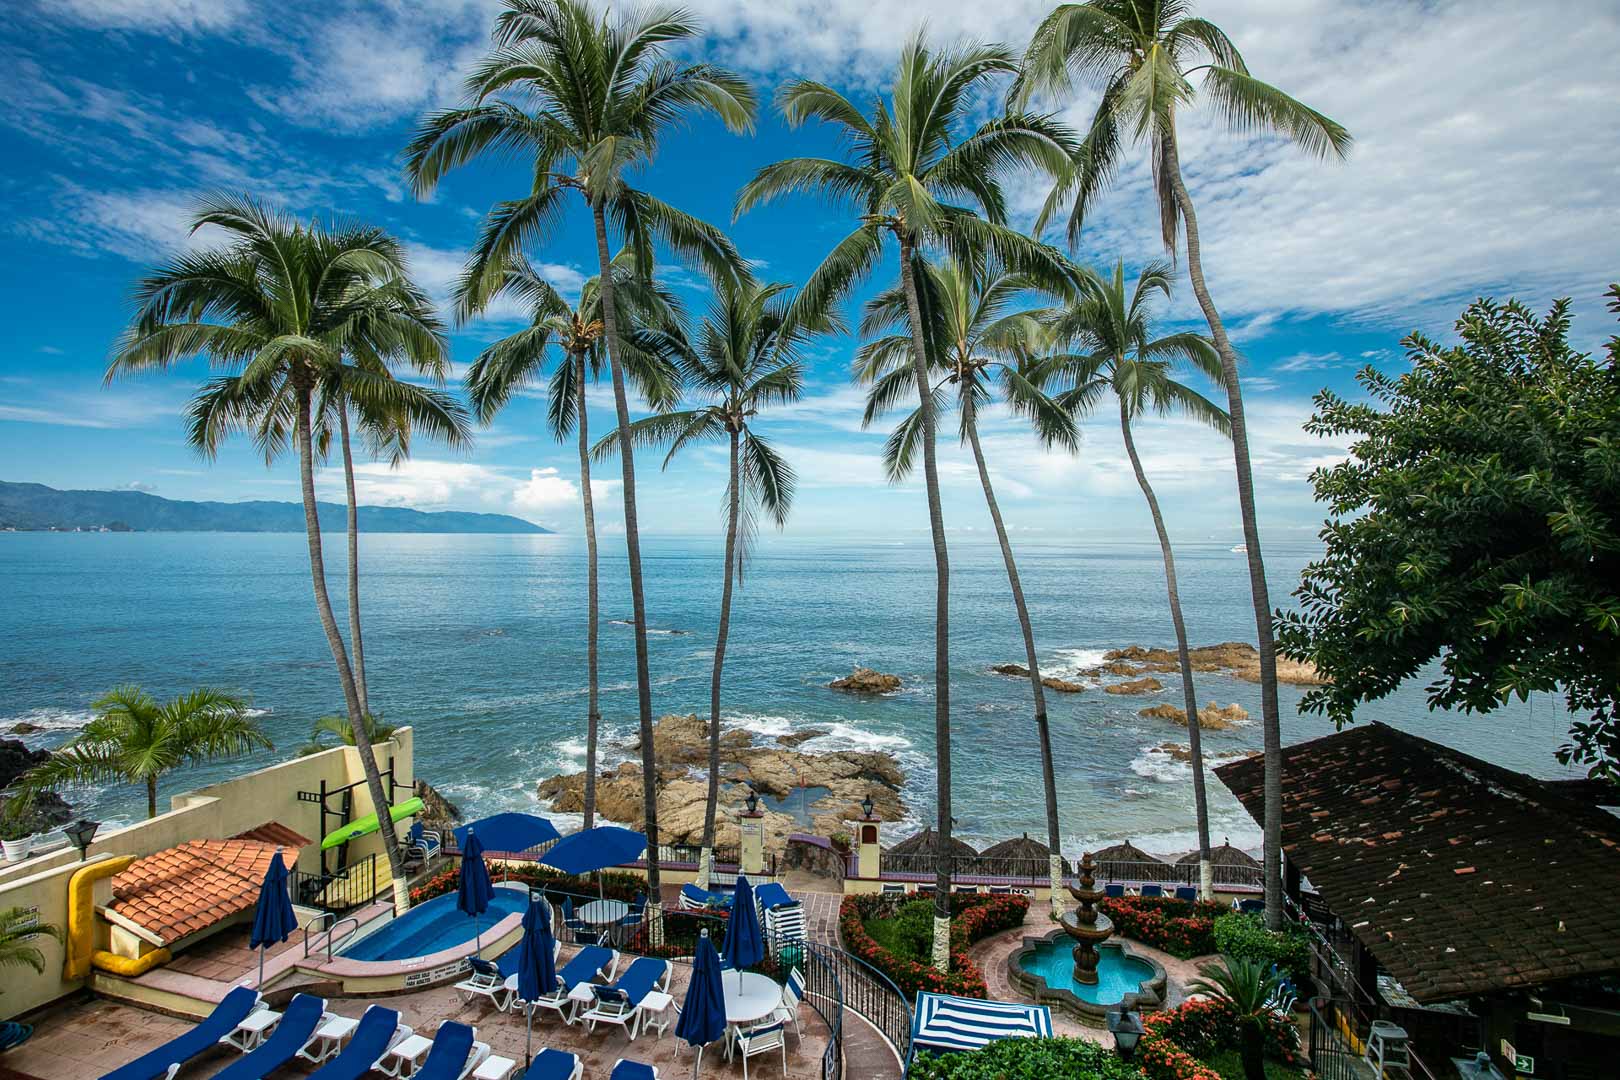 A refreshing view of the ocean at TPI's Lindo Mar Resort in Puerto Vallarta, Mexico.